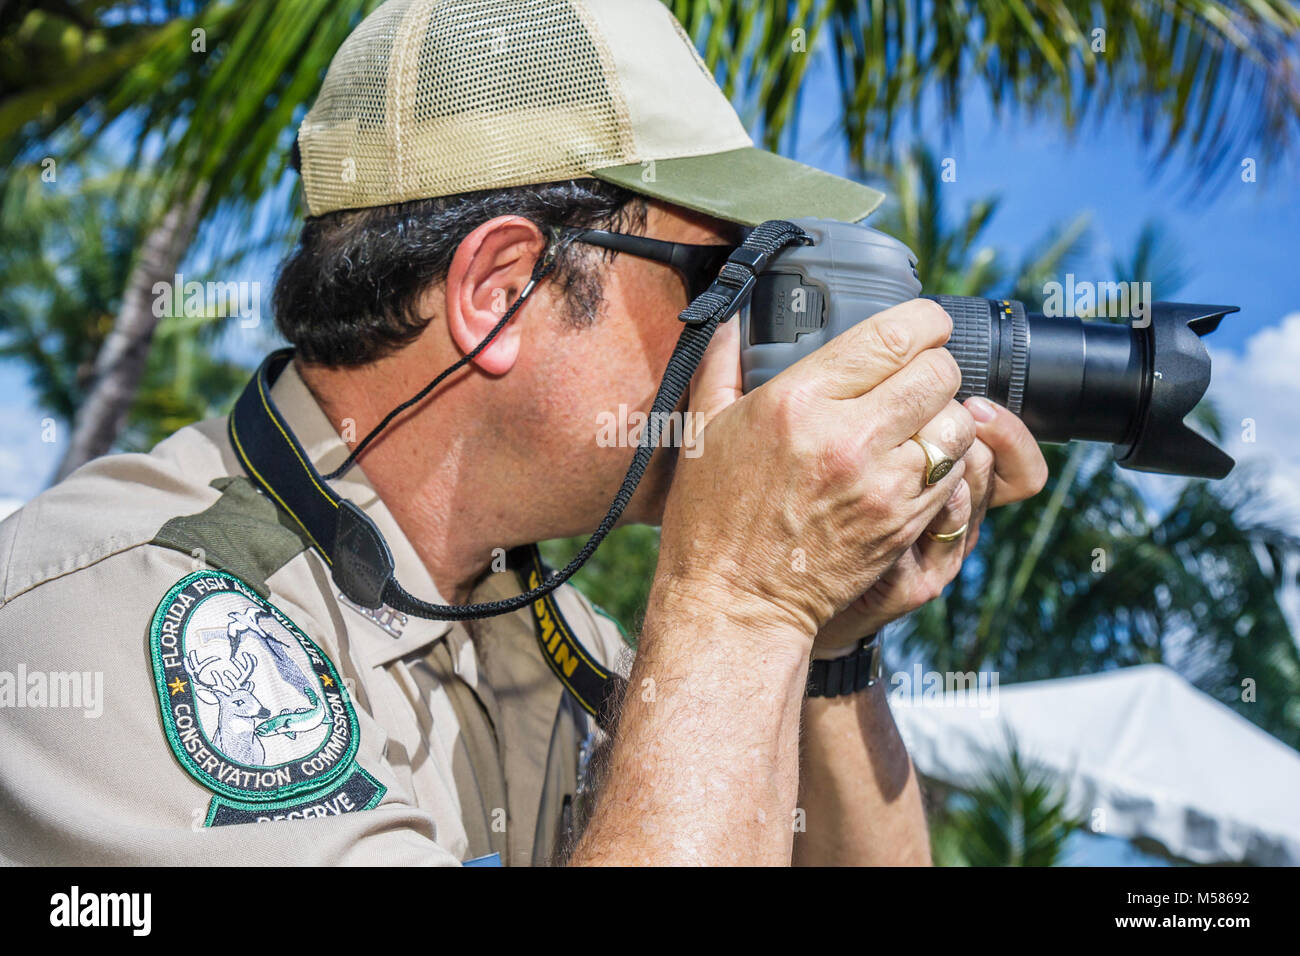 Miami Florida,Metrozoo,Nonnative Pet Amnesty Day,unwanted exotic animals,Fish and Wildlife Conservation Commission,man men male adult adults,camera,di Stock Photo